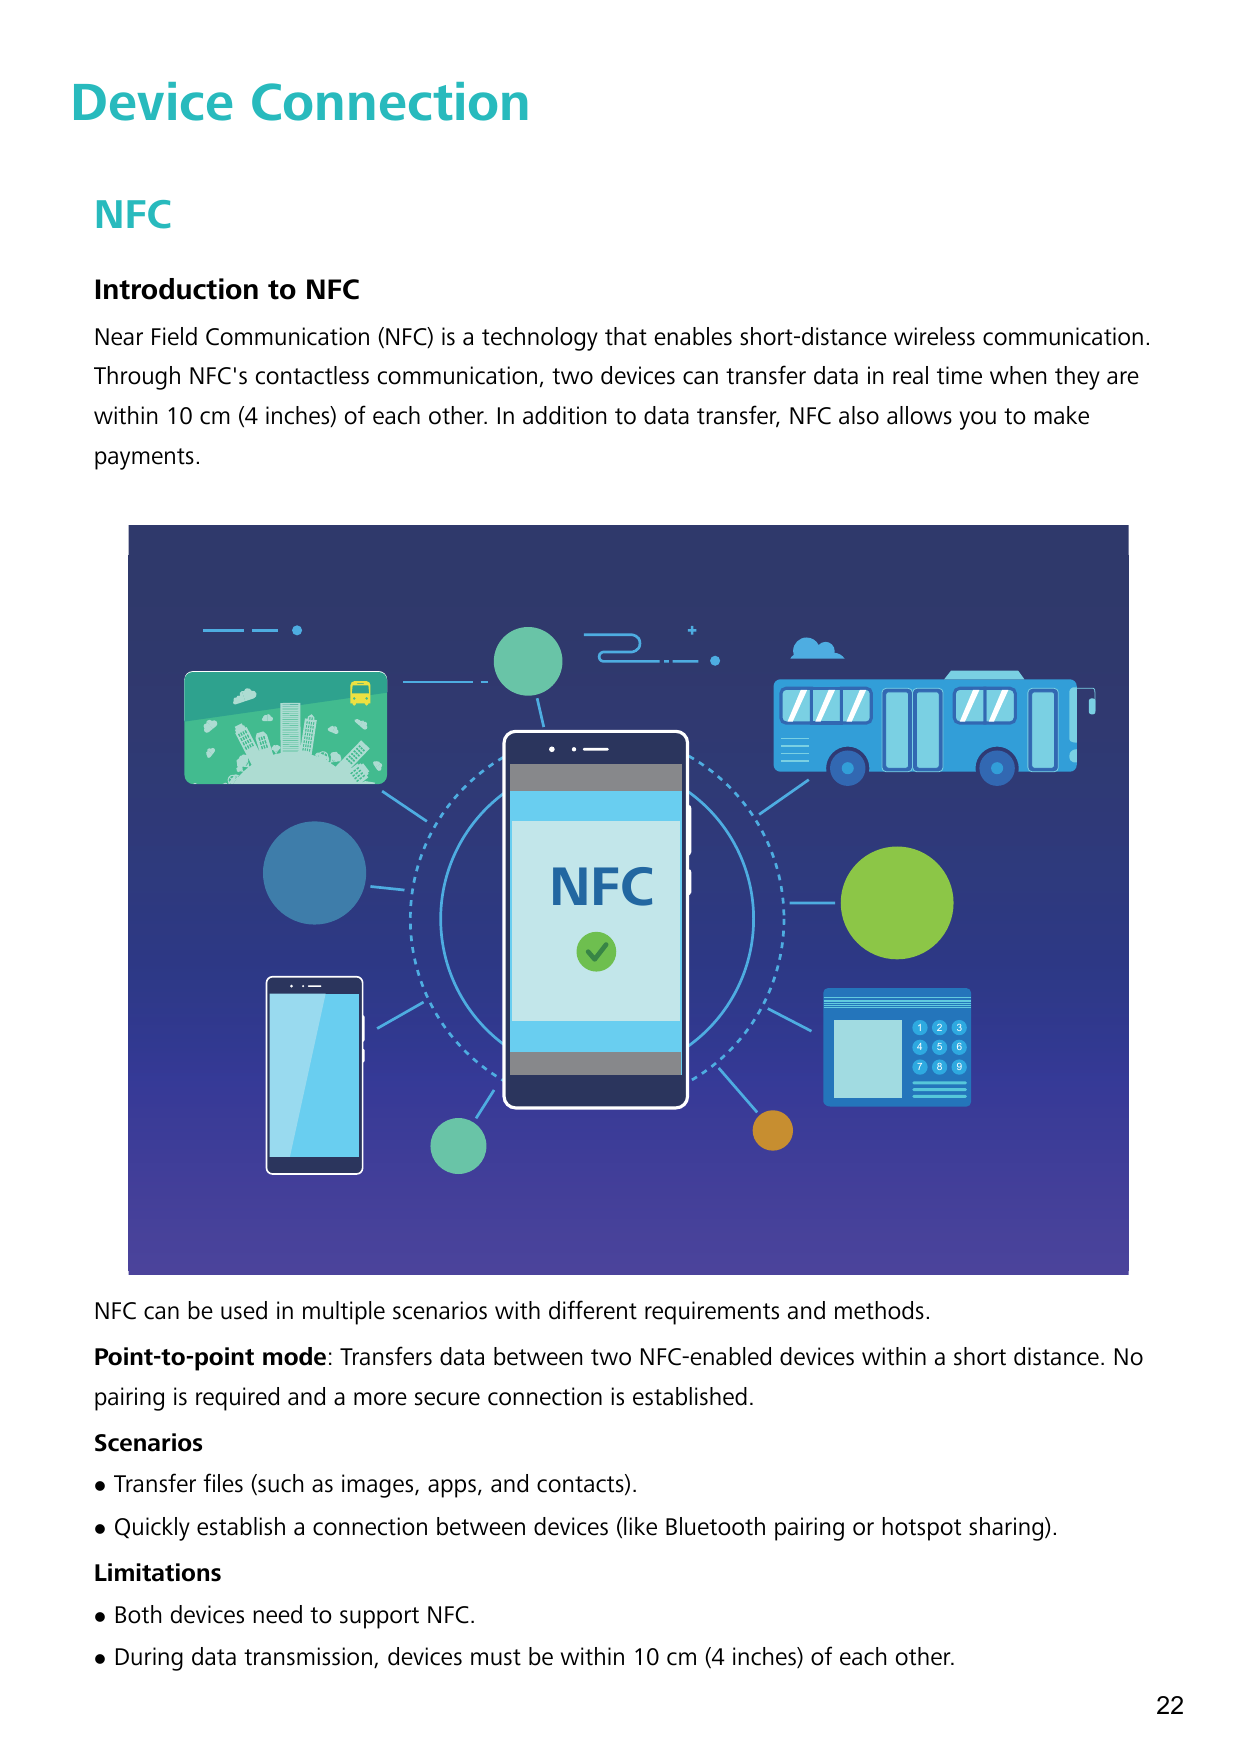 Device ConnectionNFCIntroduction to NFCNear Field Communication (NFC) is a technology that enables short-distance wireless commu